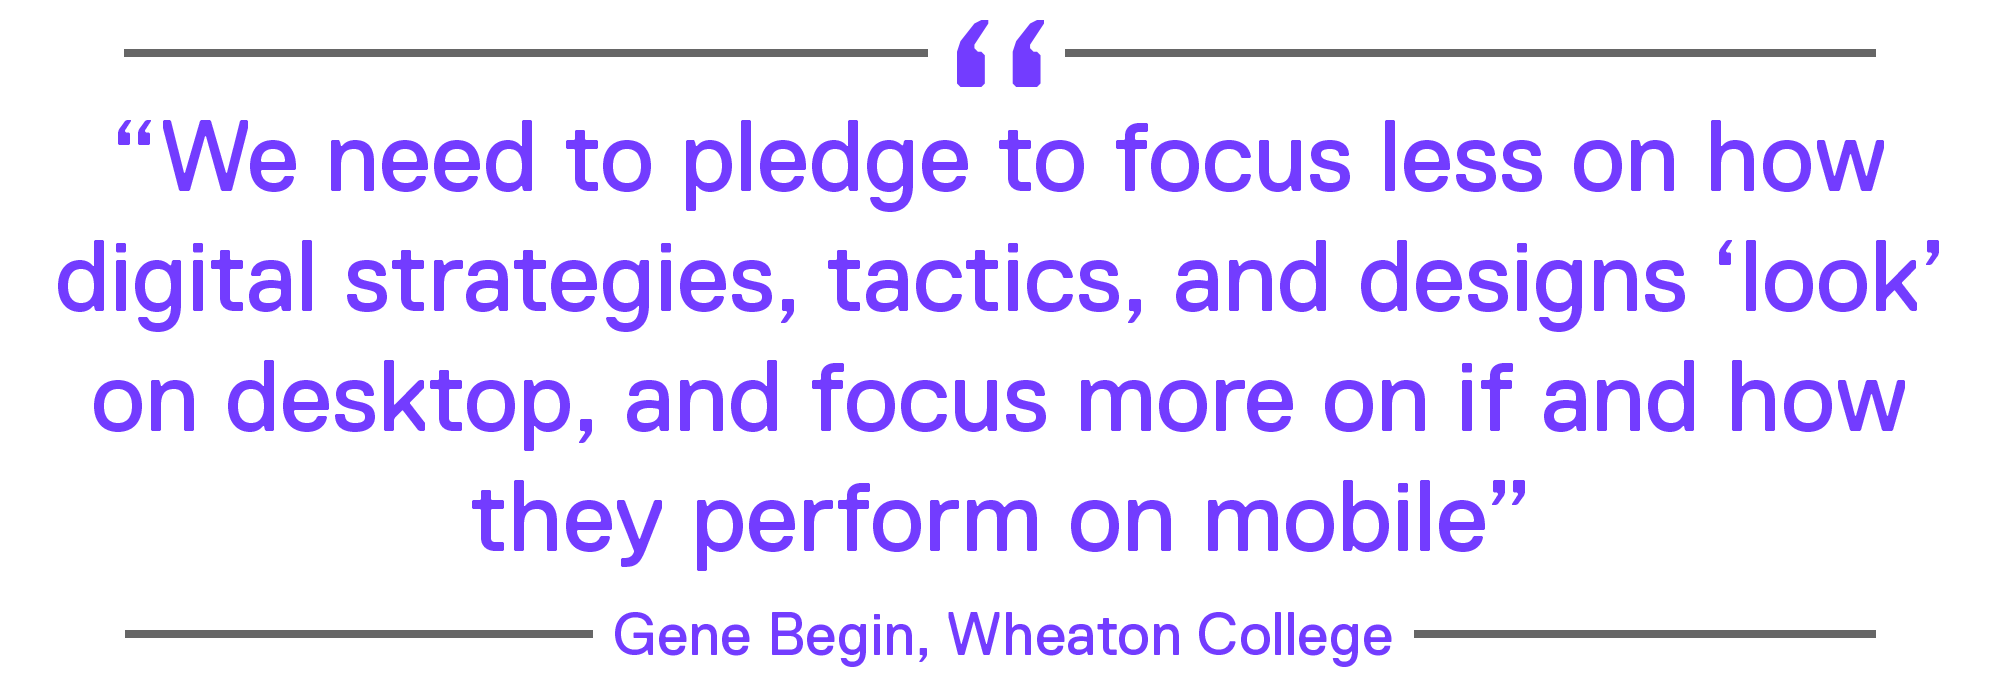 We need to pledge to focus less on how digital strategies, tactics, and designs ‘look’ on desktop, and focus more on if and how they perform on mobile.” – Gene Begin, Wheaton College